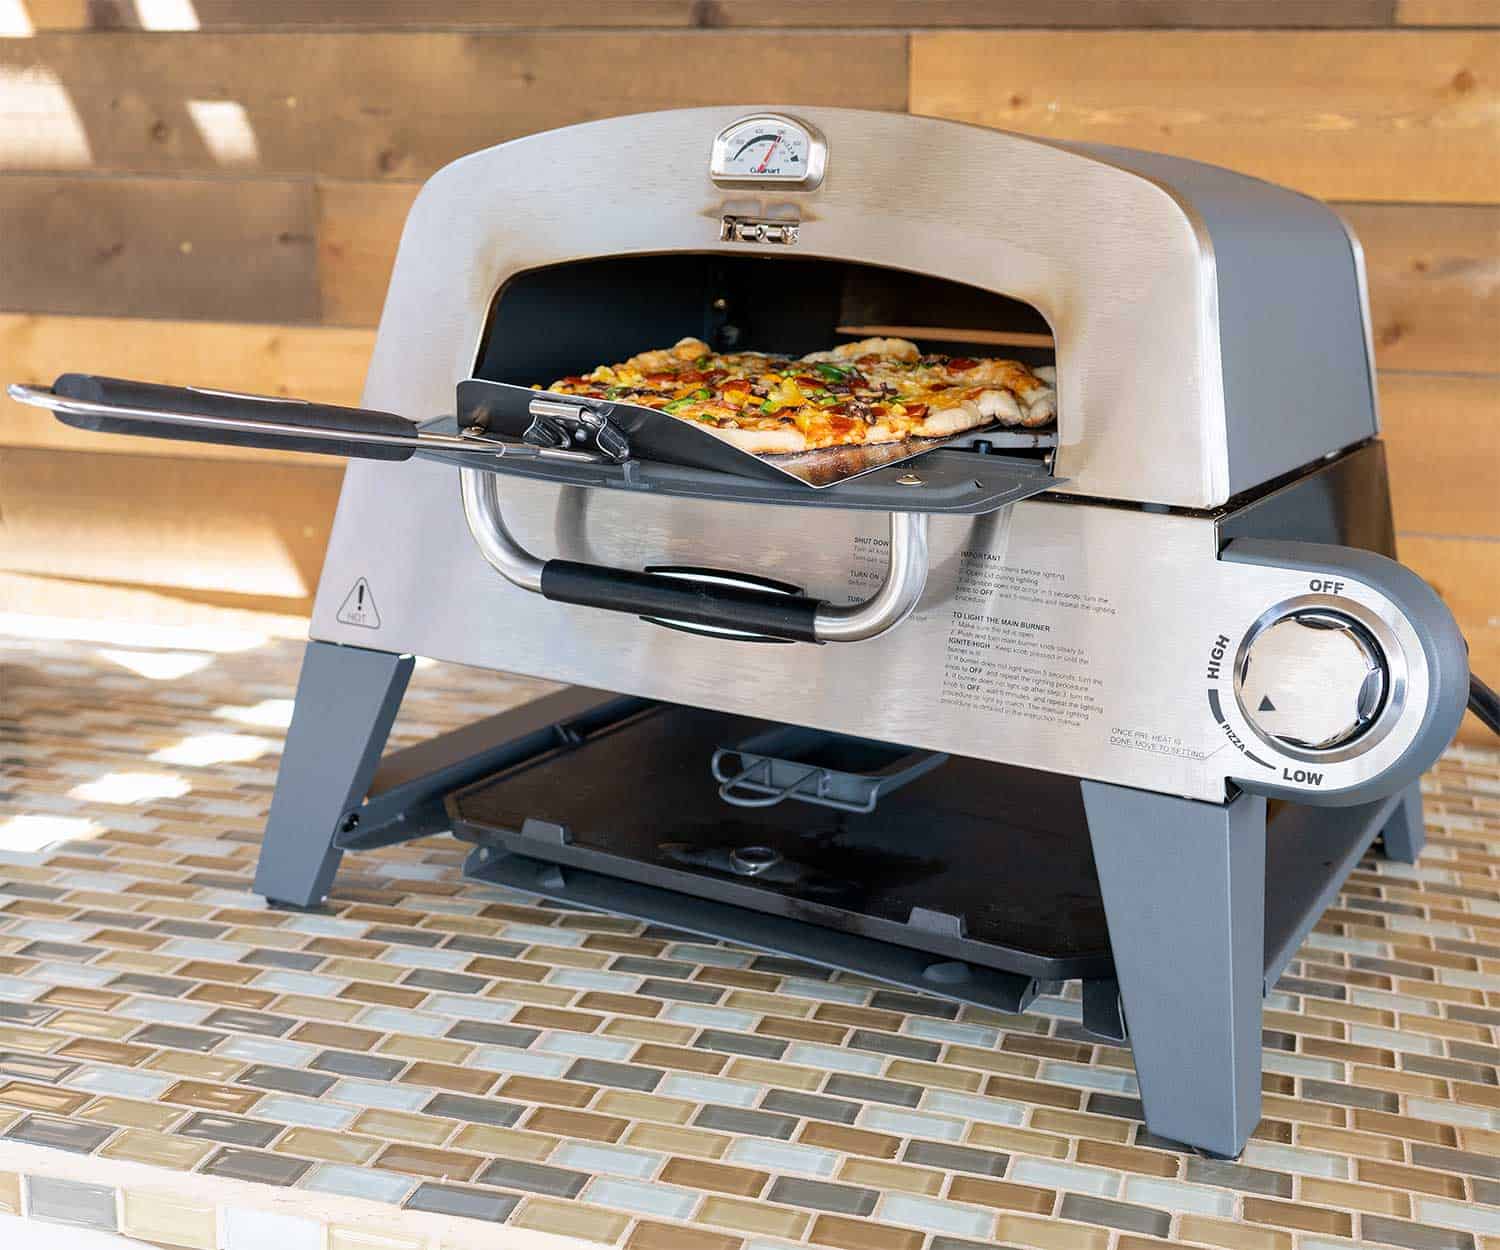 Cuisinart 3-in-1 Pizza Oven Plus with pizza coming out front door on peel.